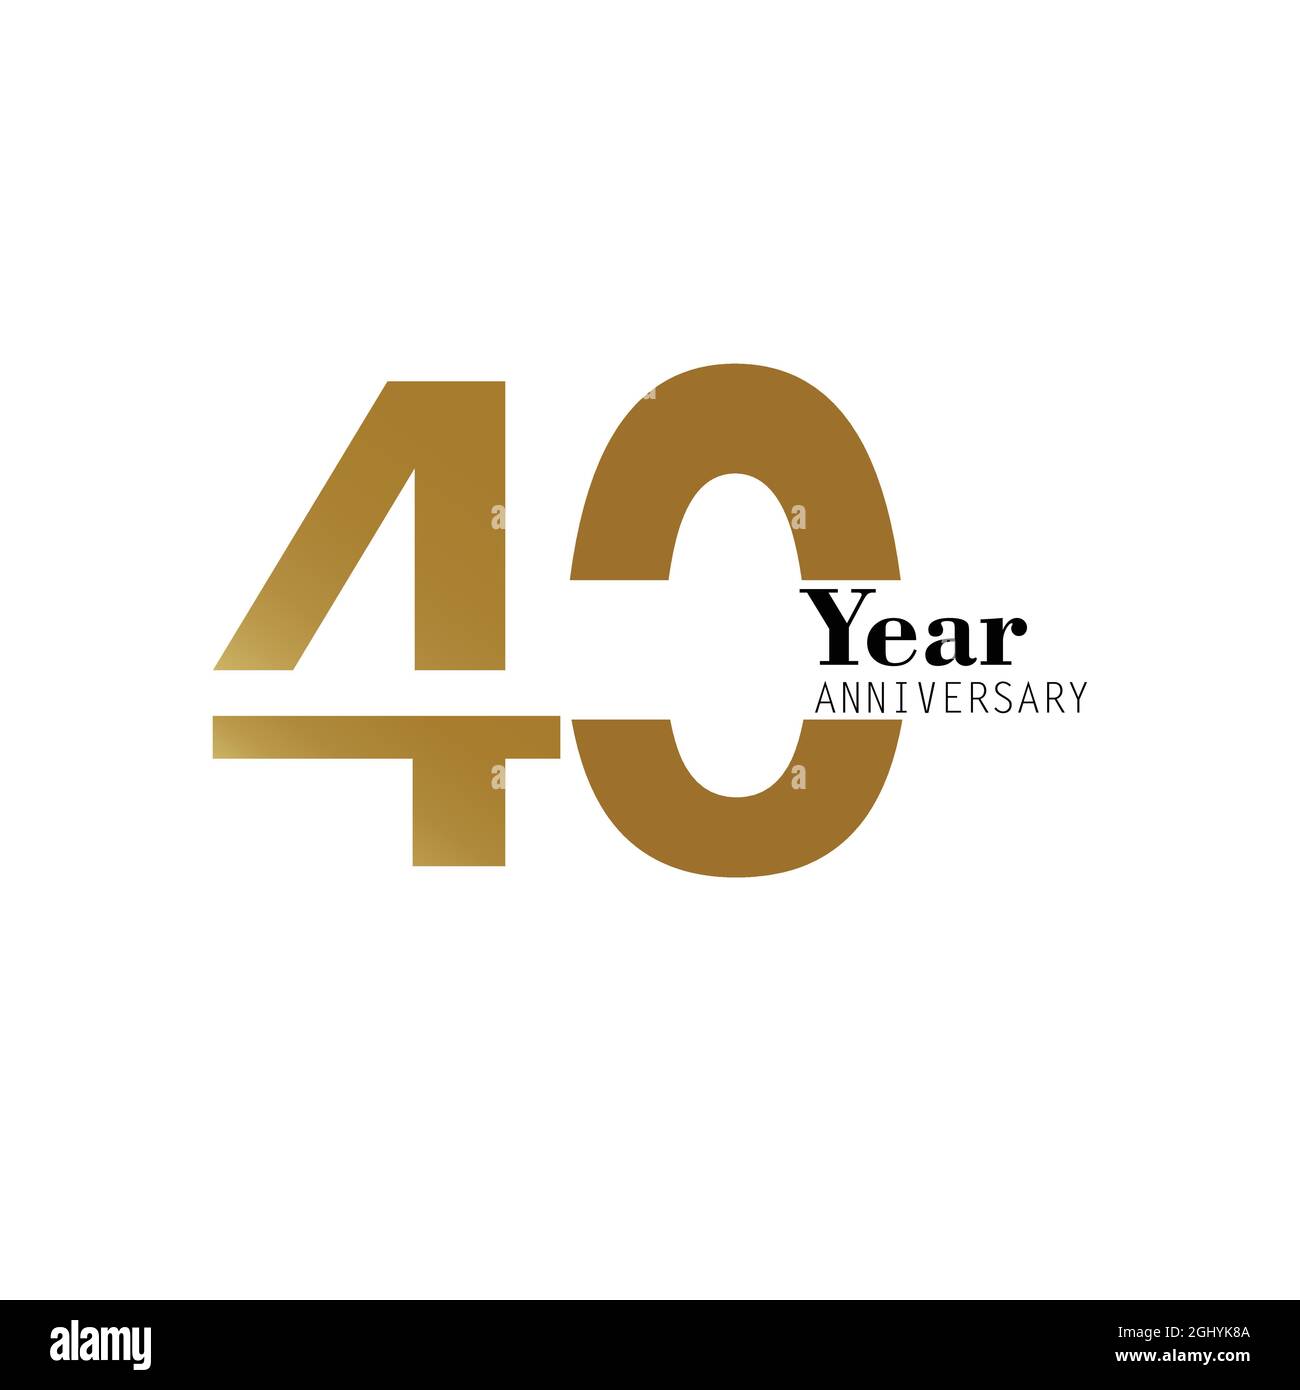 40 Year Anniversary Logo Vector Template Design Illustration gold and ...